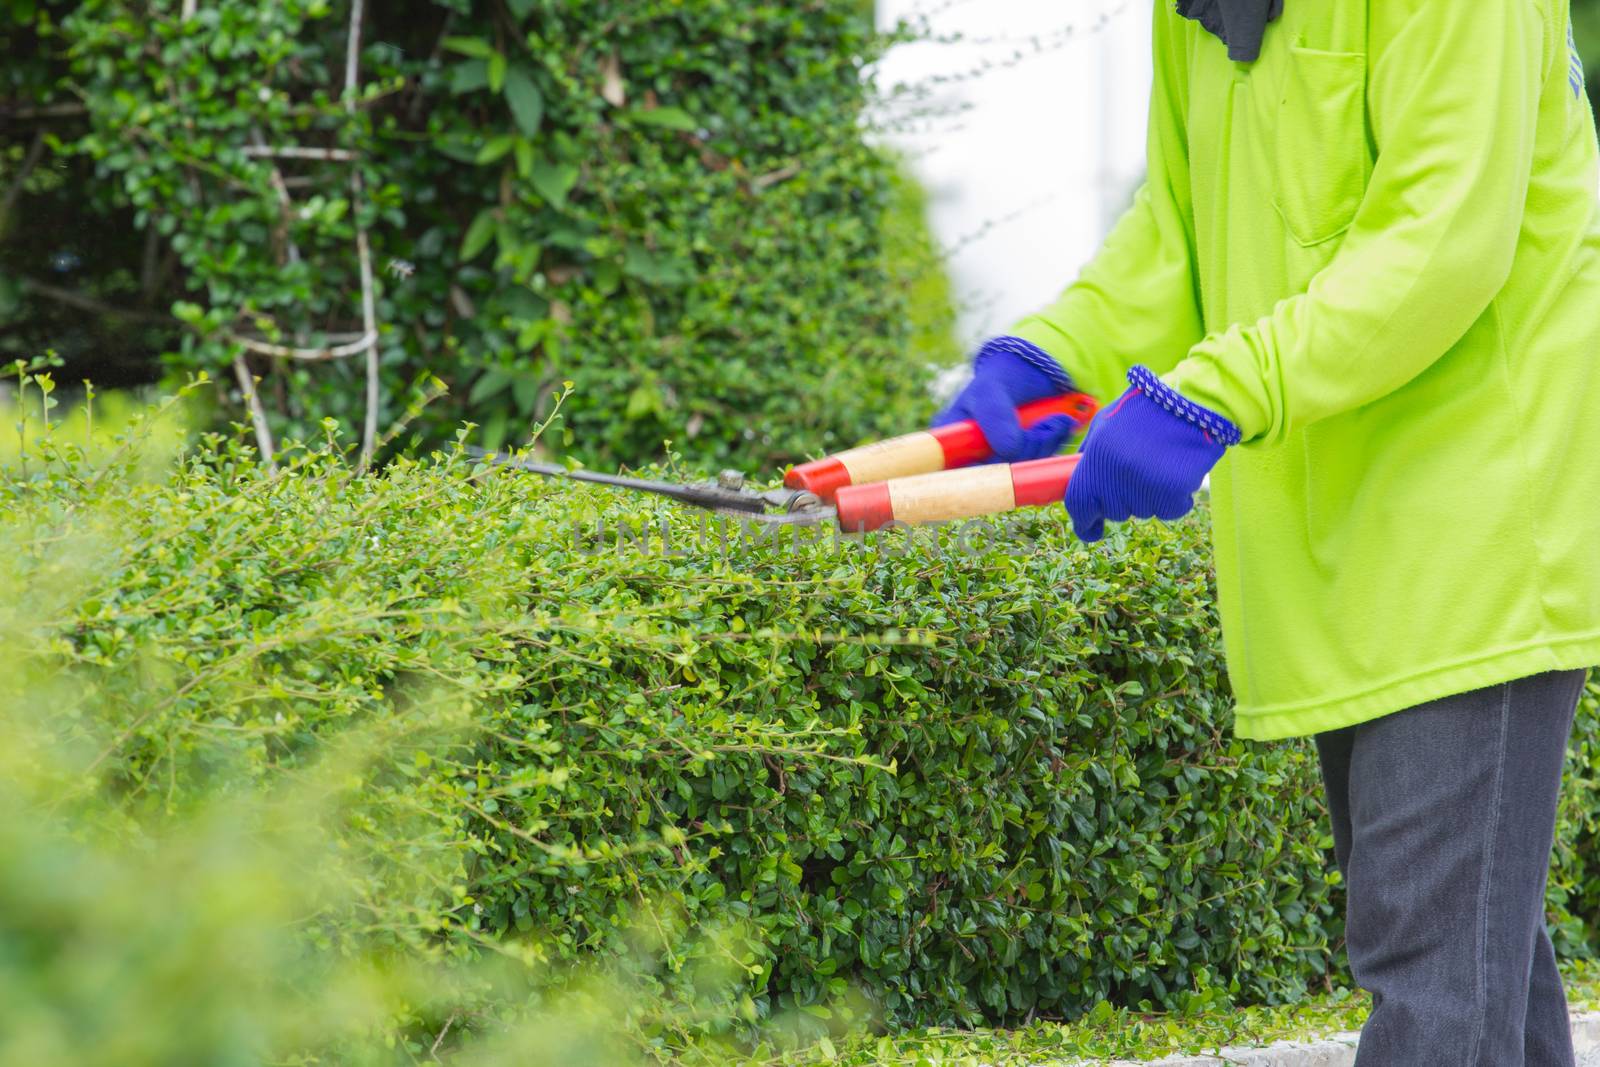 Blurred image of a man cutting green bush (motion blur image) by a3701027